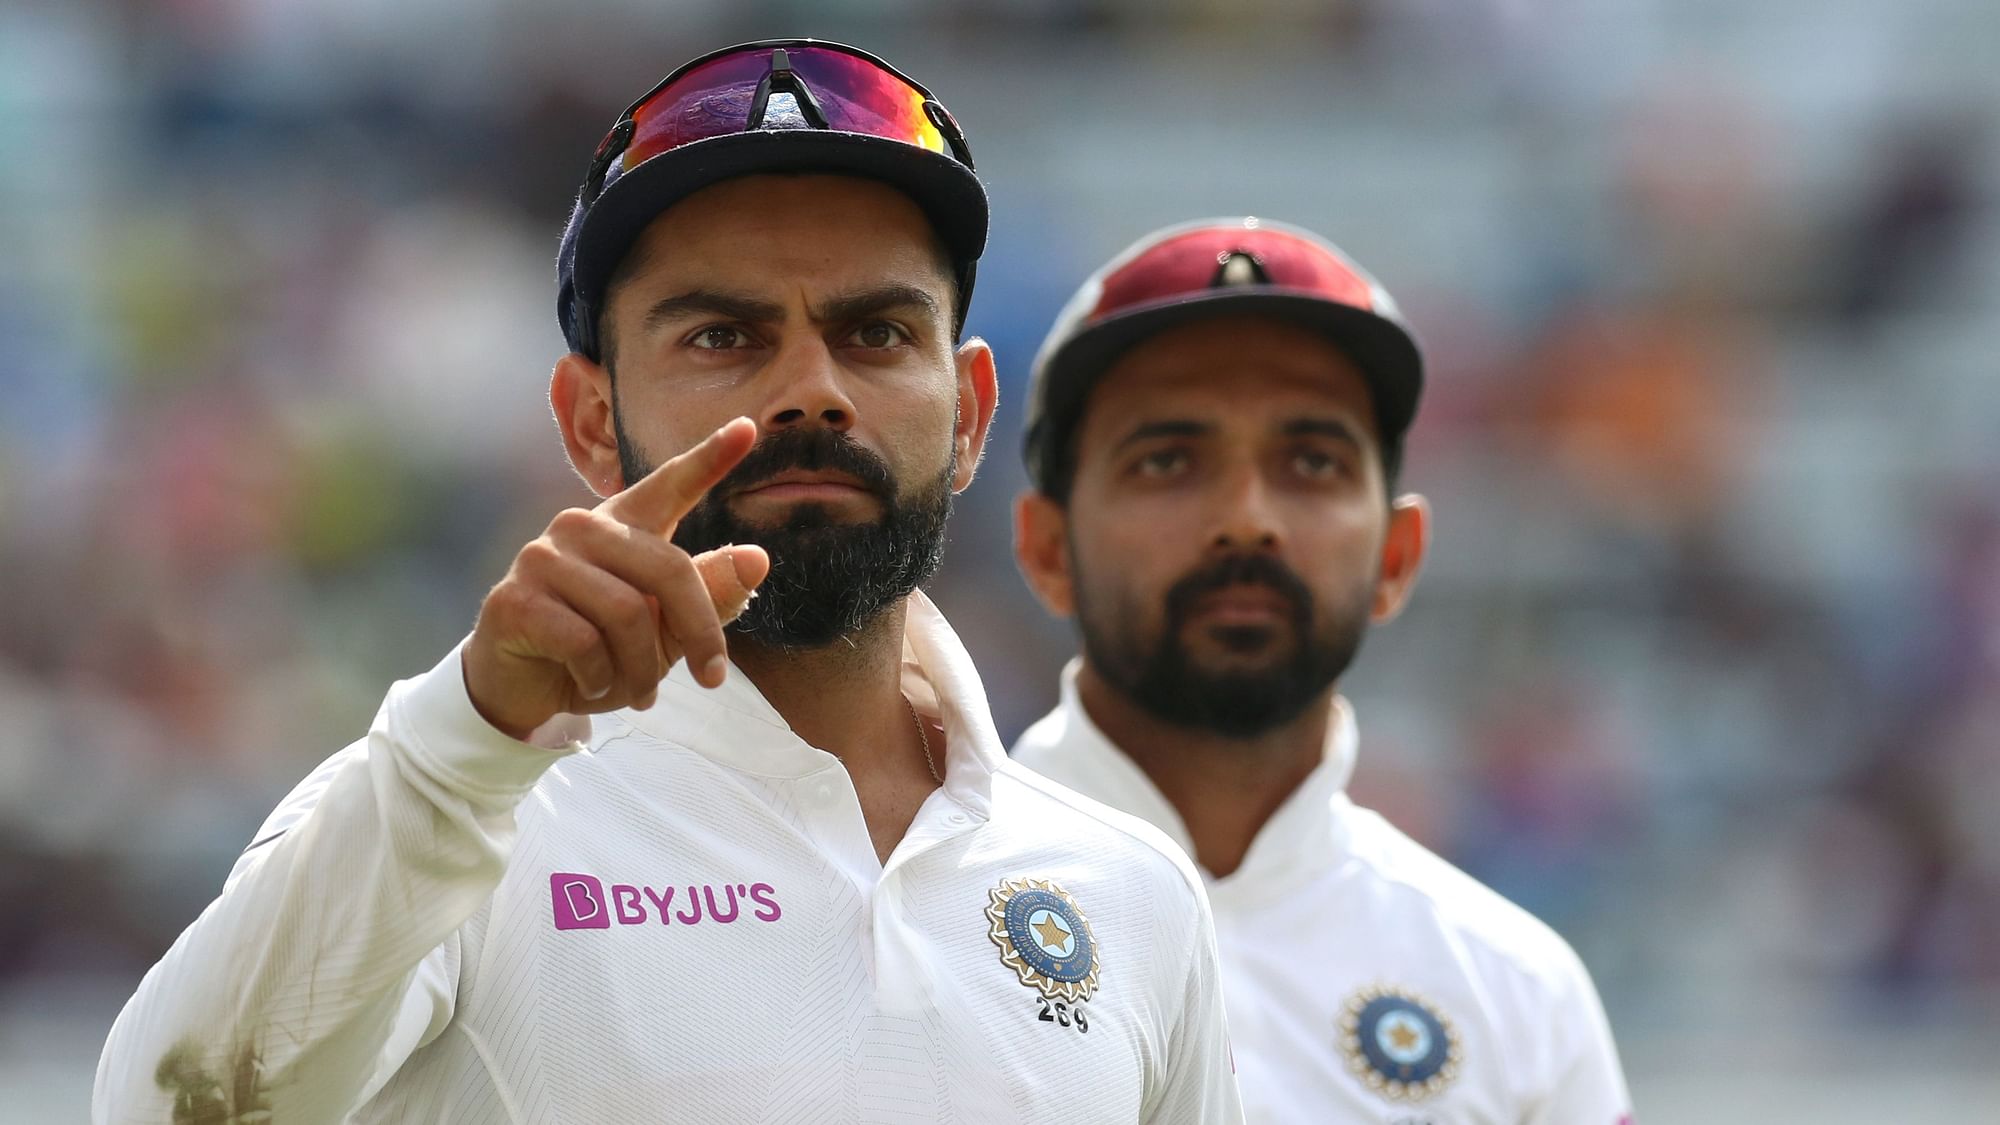 Virat Kohli has said Test cricket should be played at just 5 centres in India.